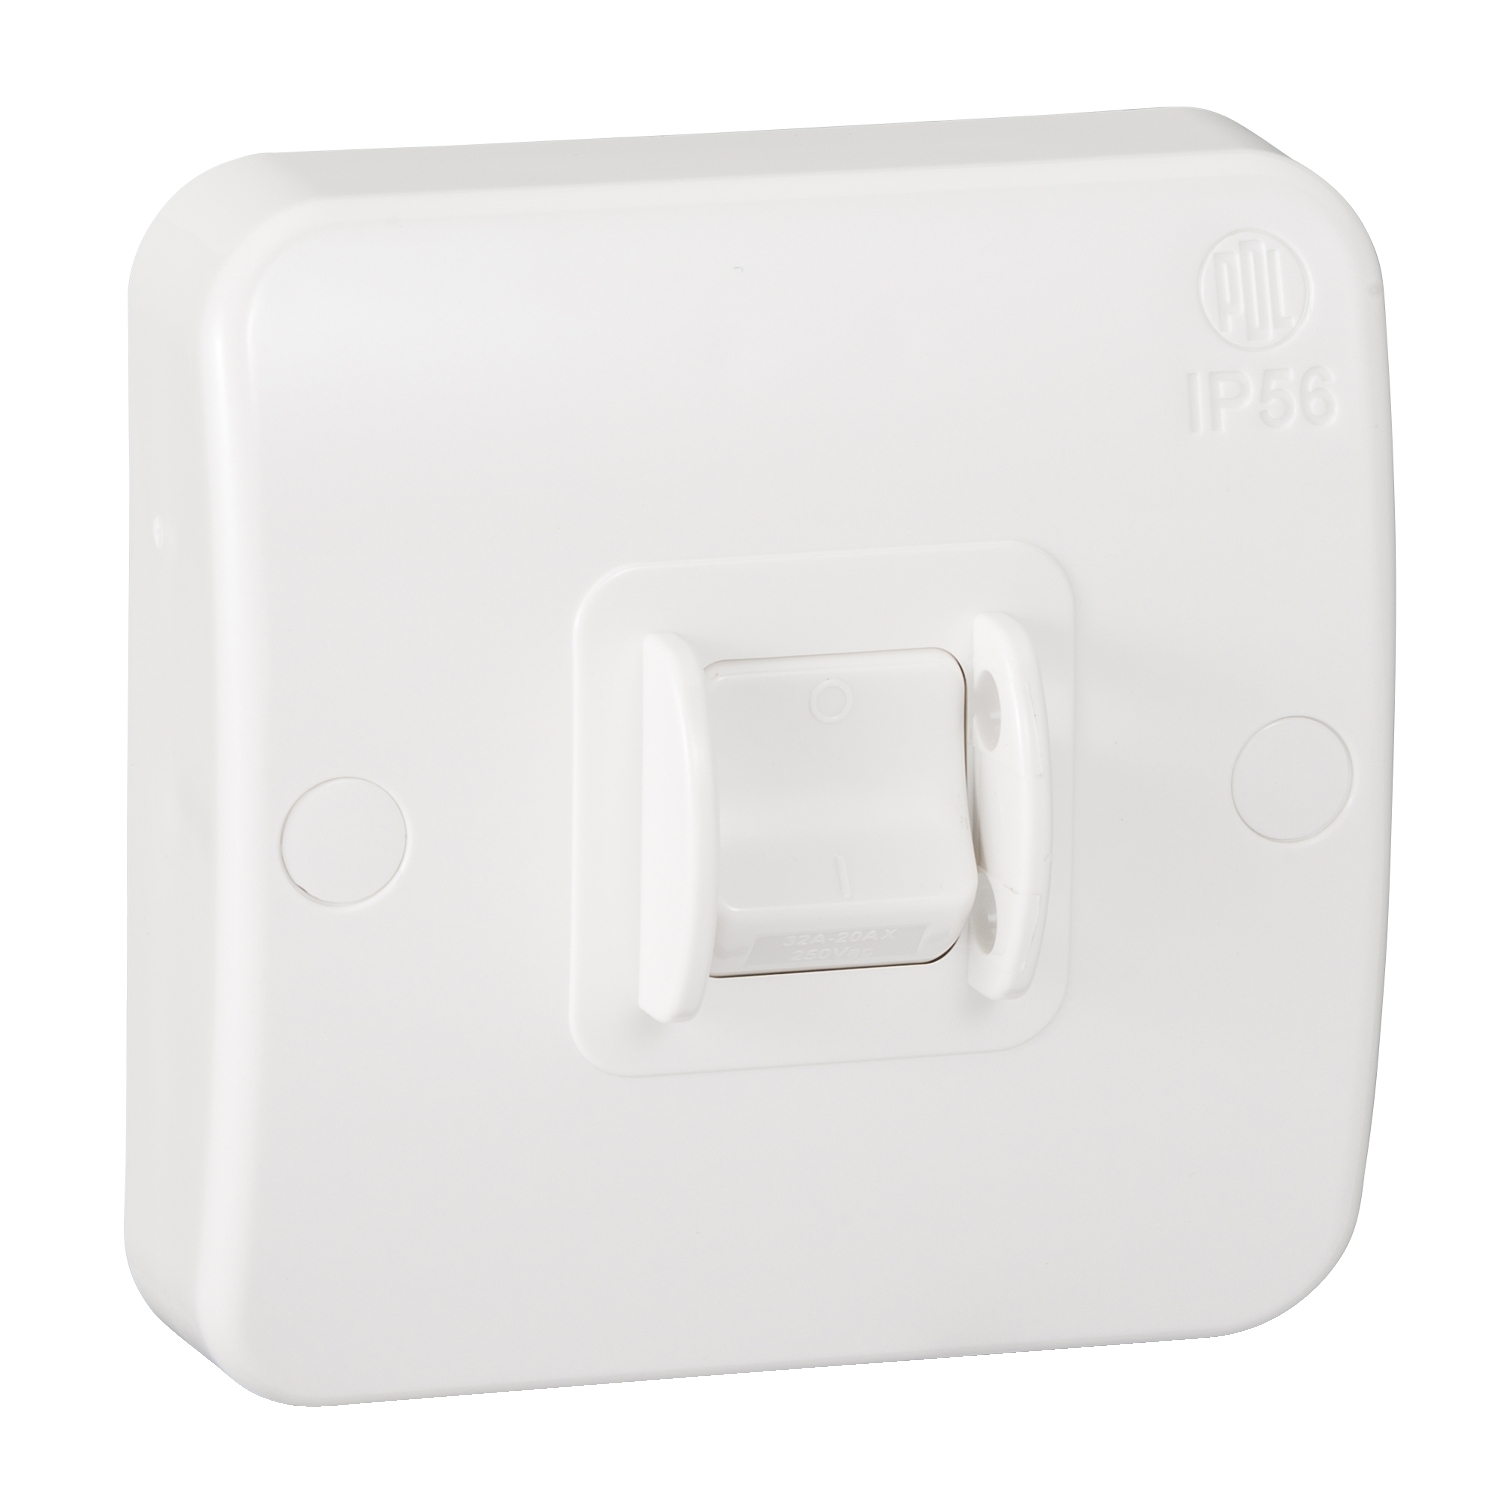 Surface switch Weatherprotected, 1 Gang, 32A, 230/240V